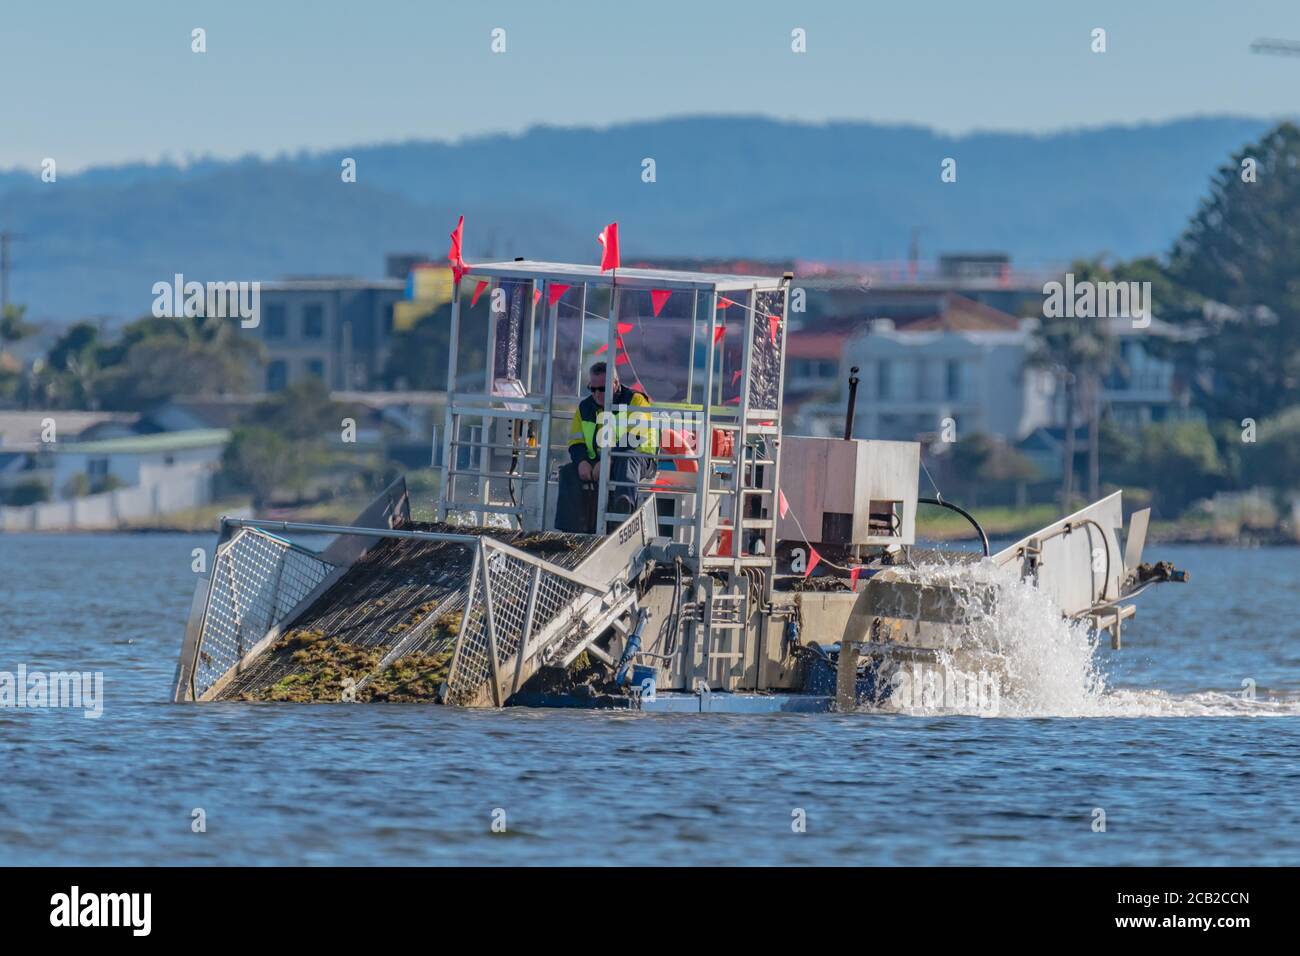 Seaweed harvesting and clean up on Lake Tuggerah at the Central Coast of NSW, Australia. Stock Photo